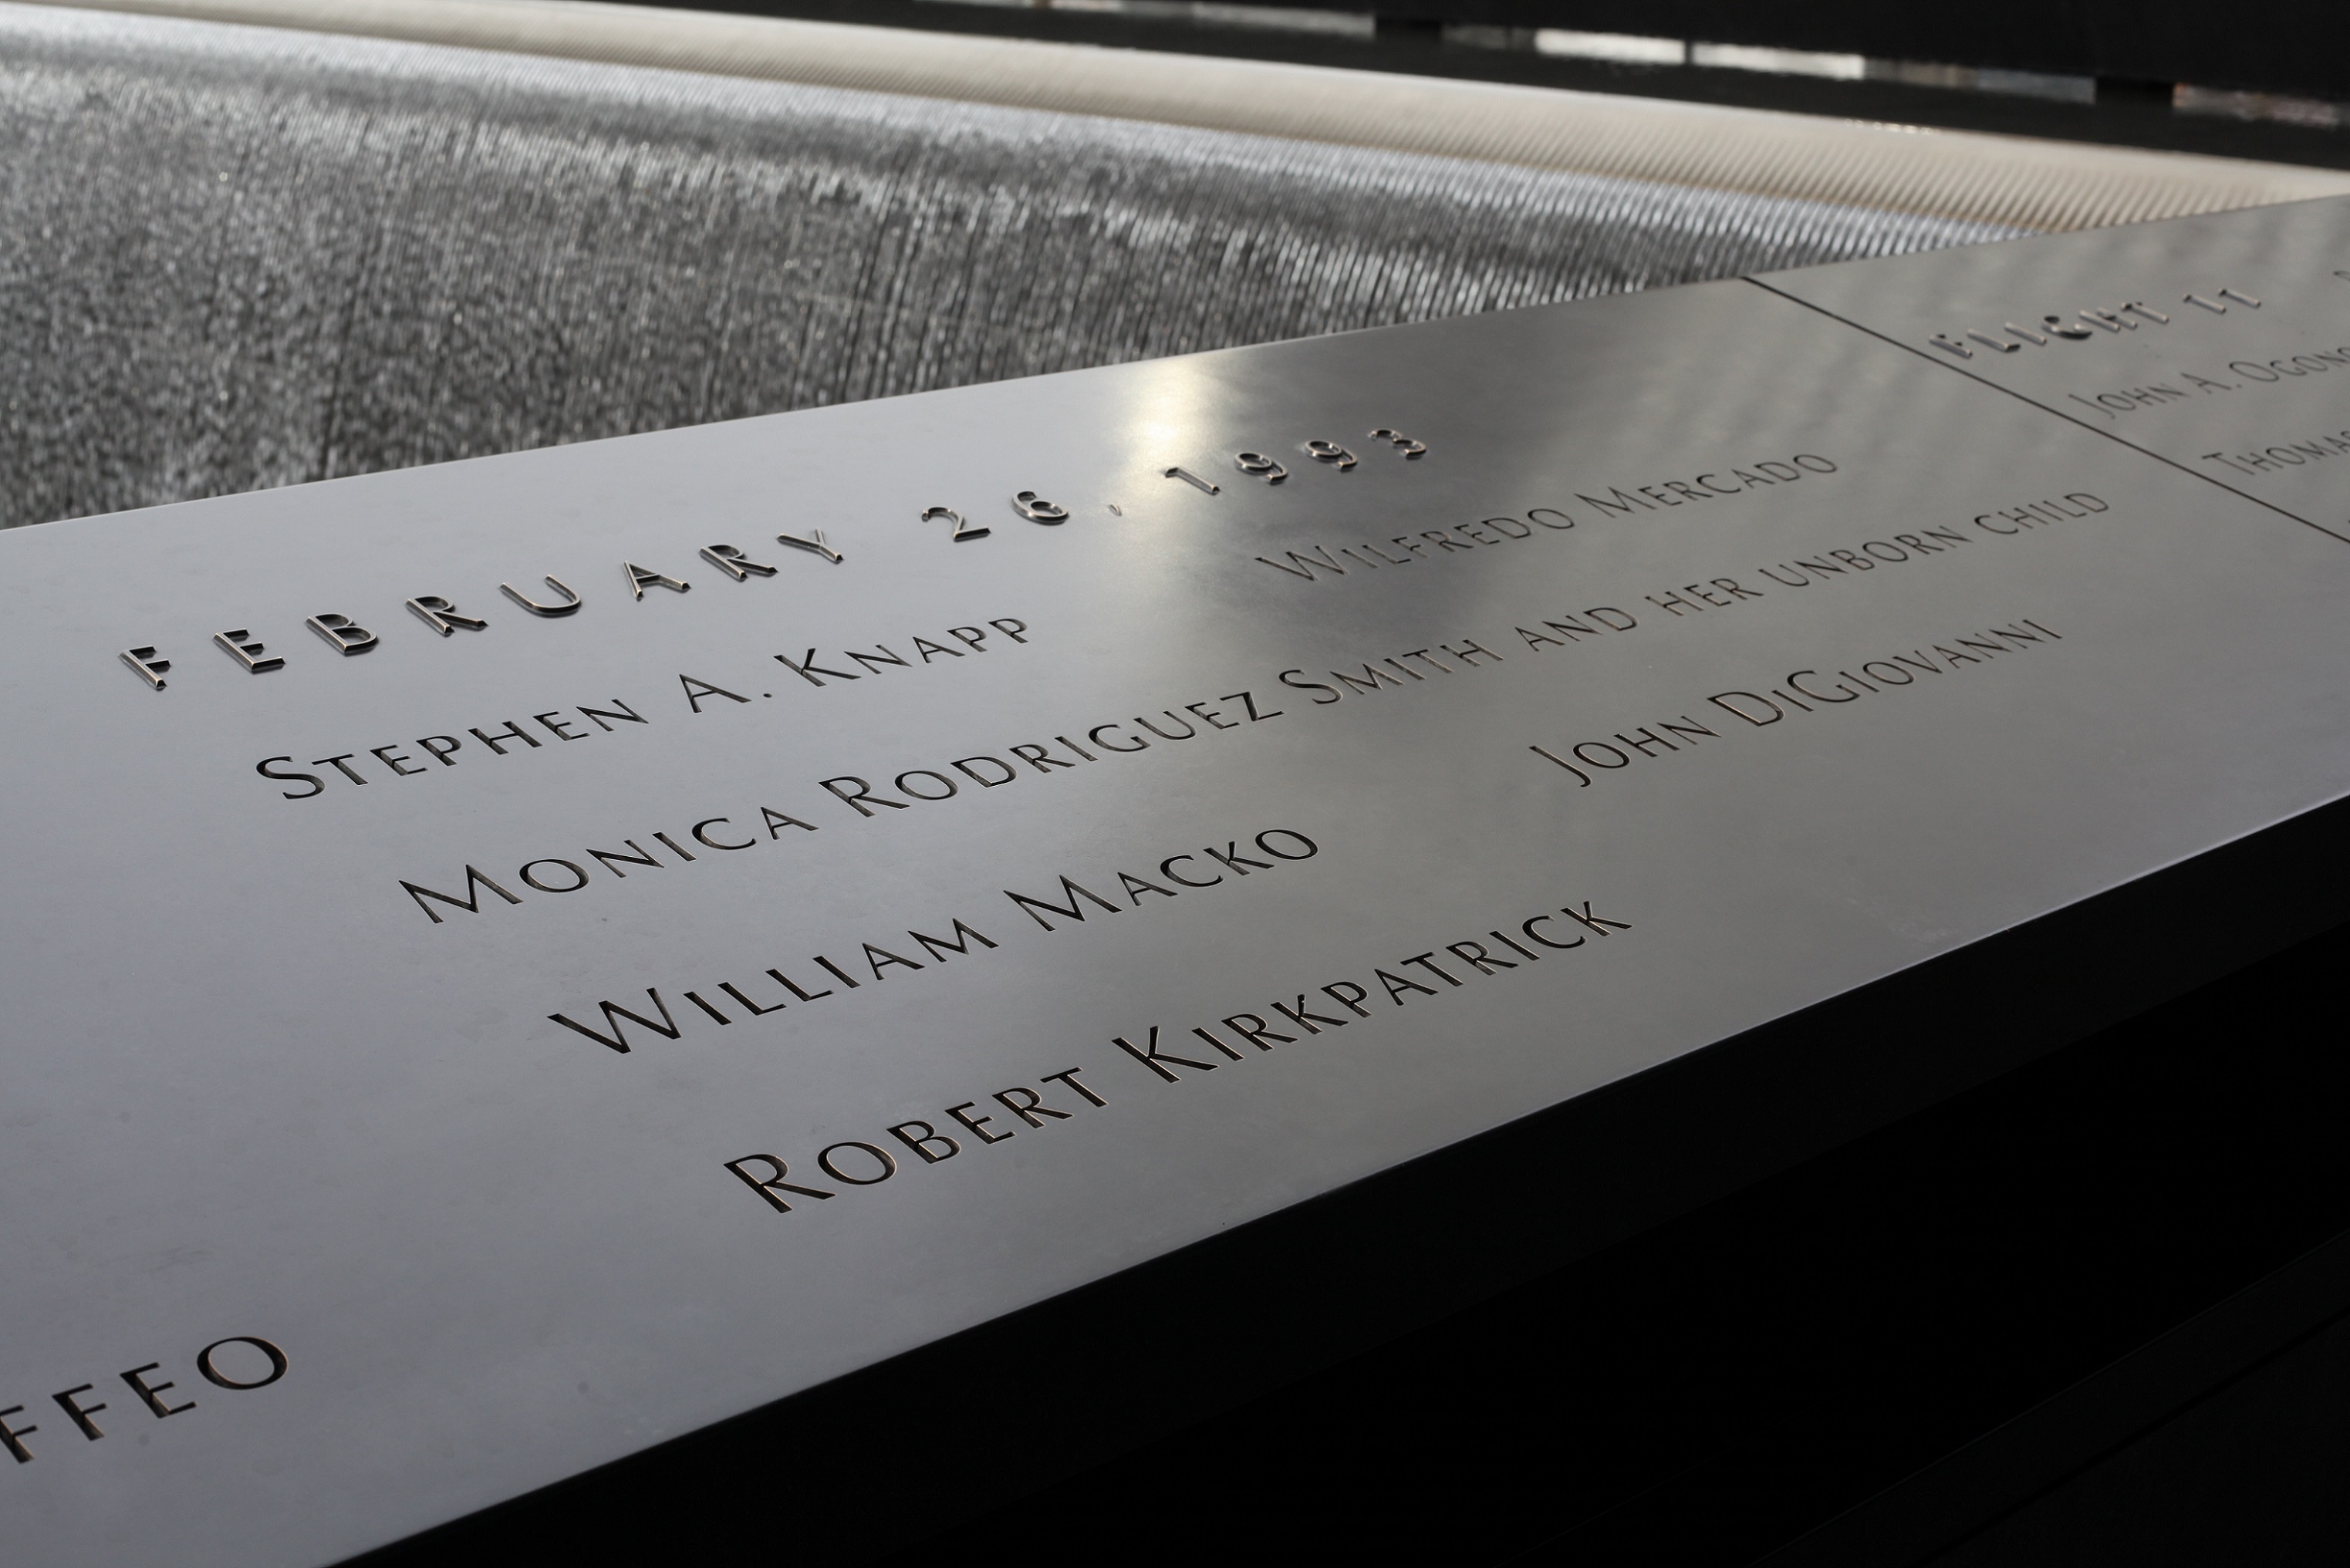 Names on the 1993 bombing victims on the Memorial parapet